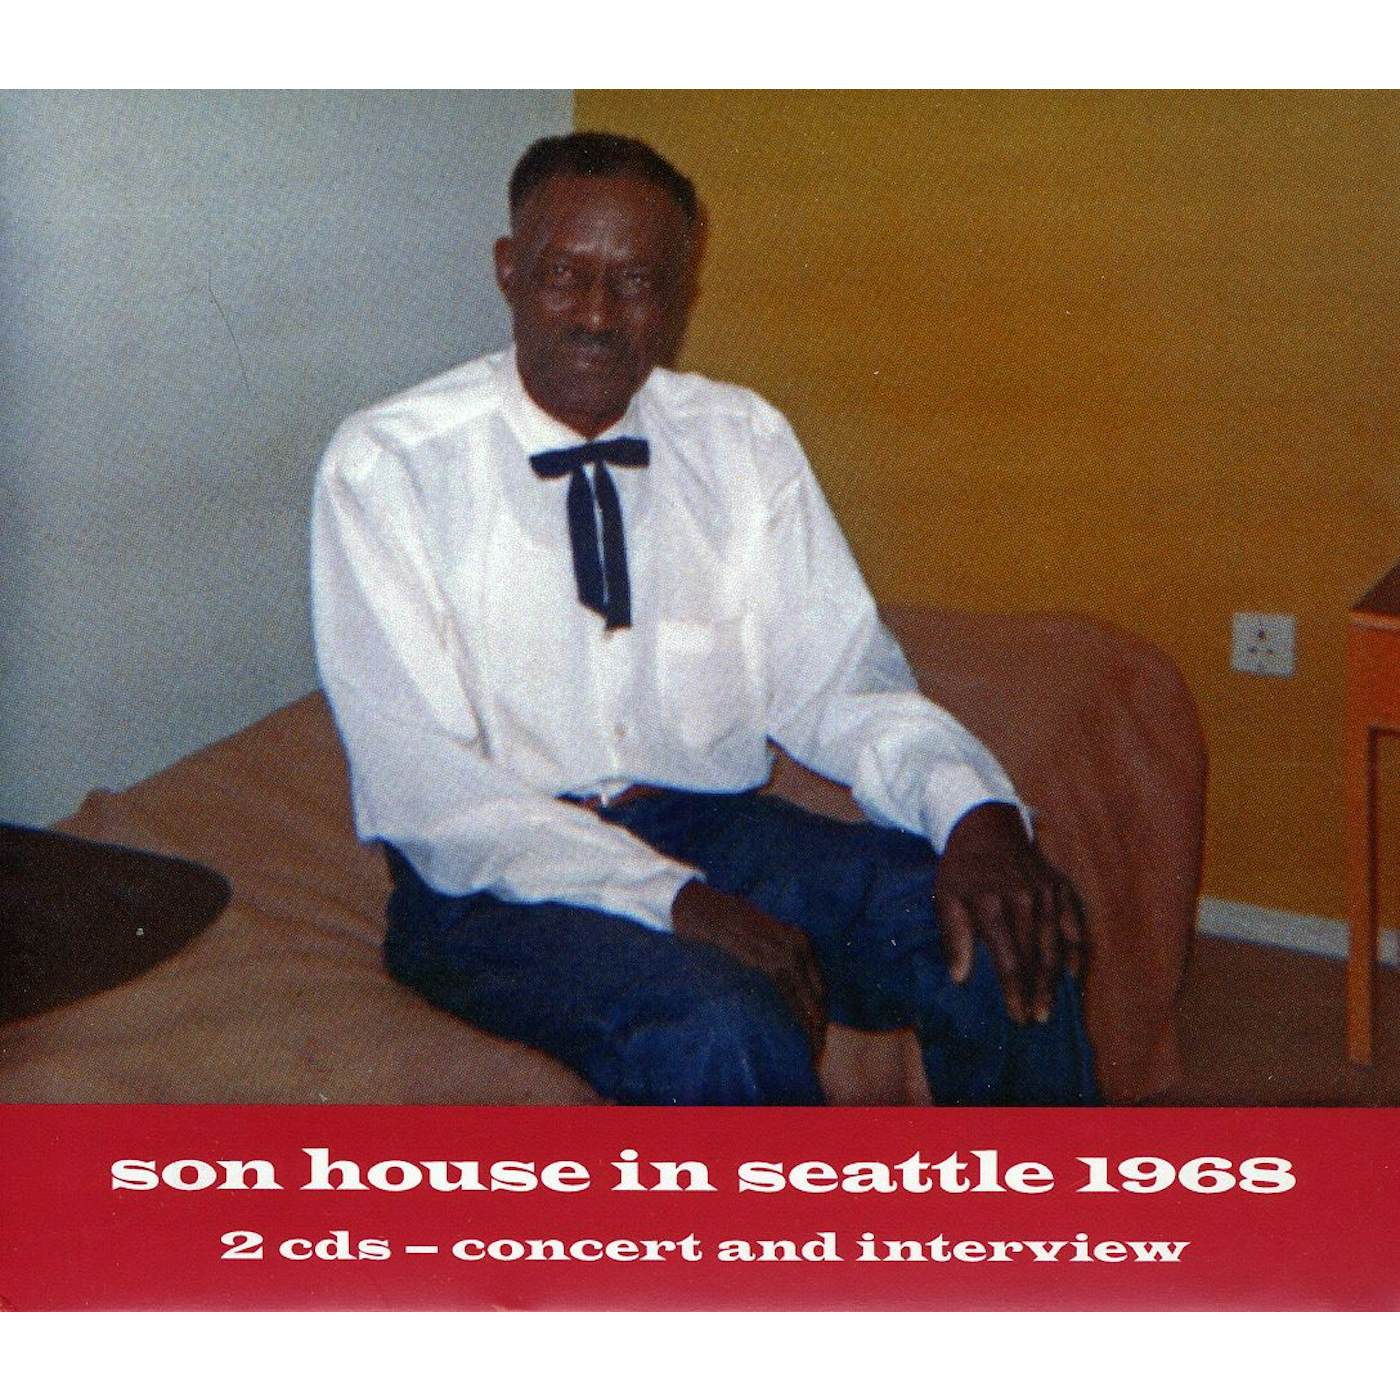 SON HOUSE IN SEATTLE 1968 CD